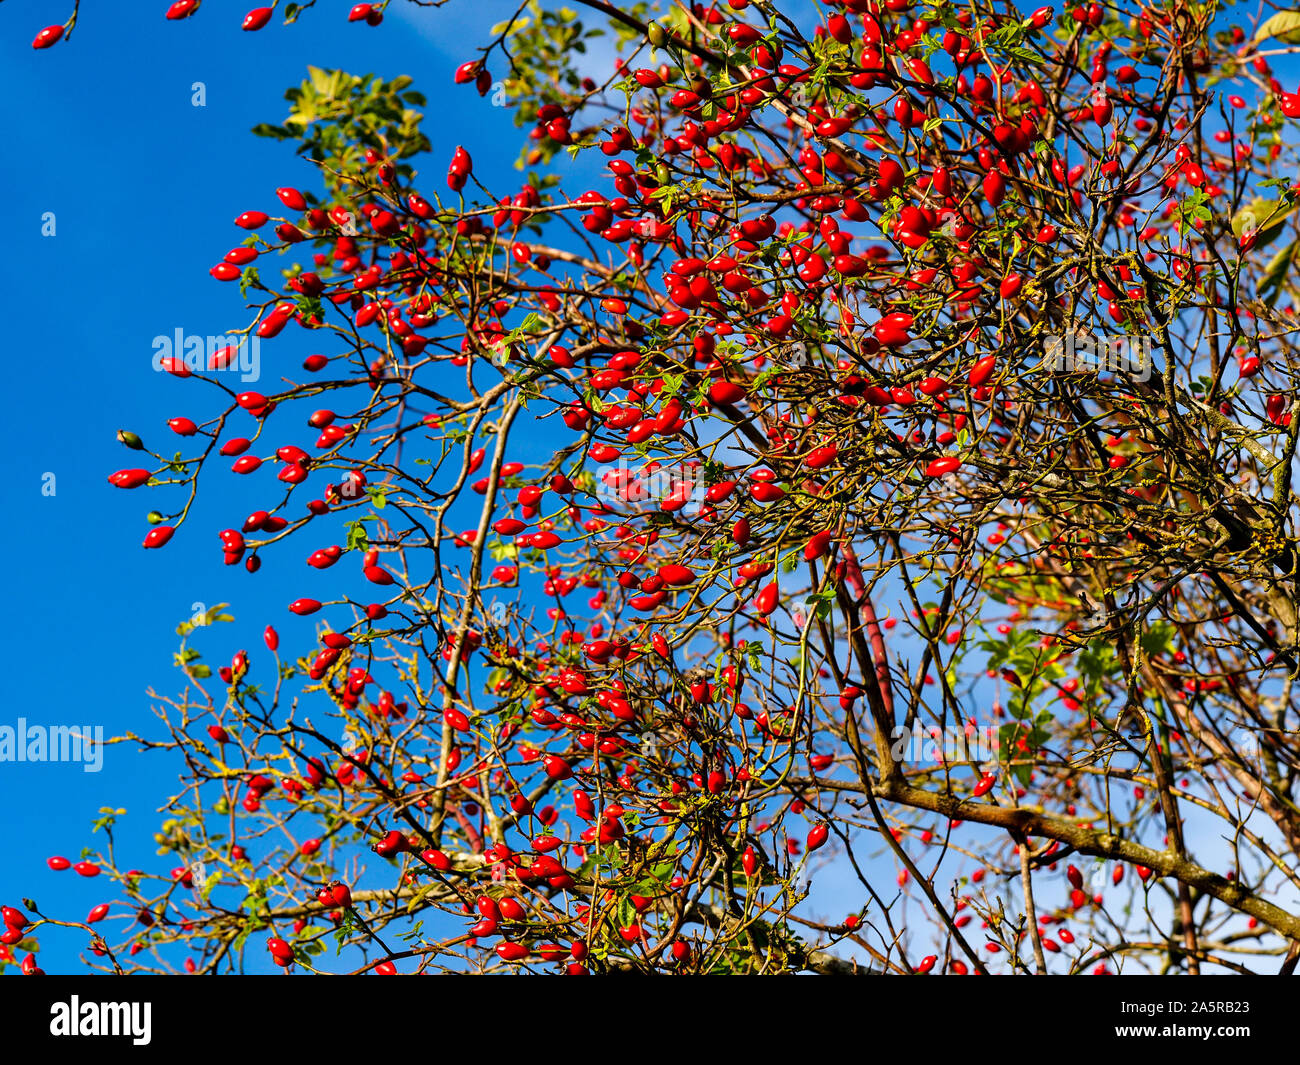 Bright red rose hips against a blue sky seen from below Stock Photo